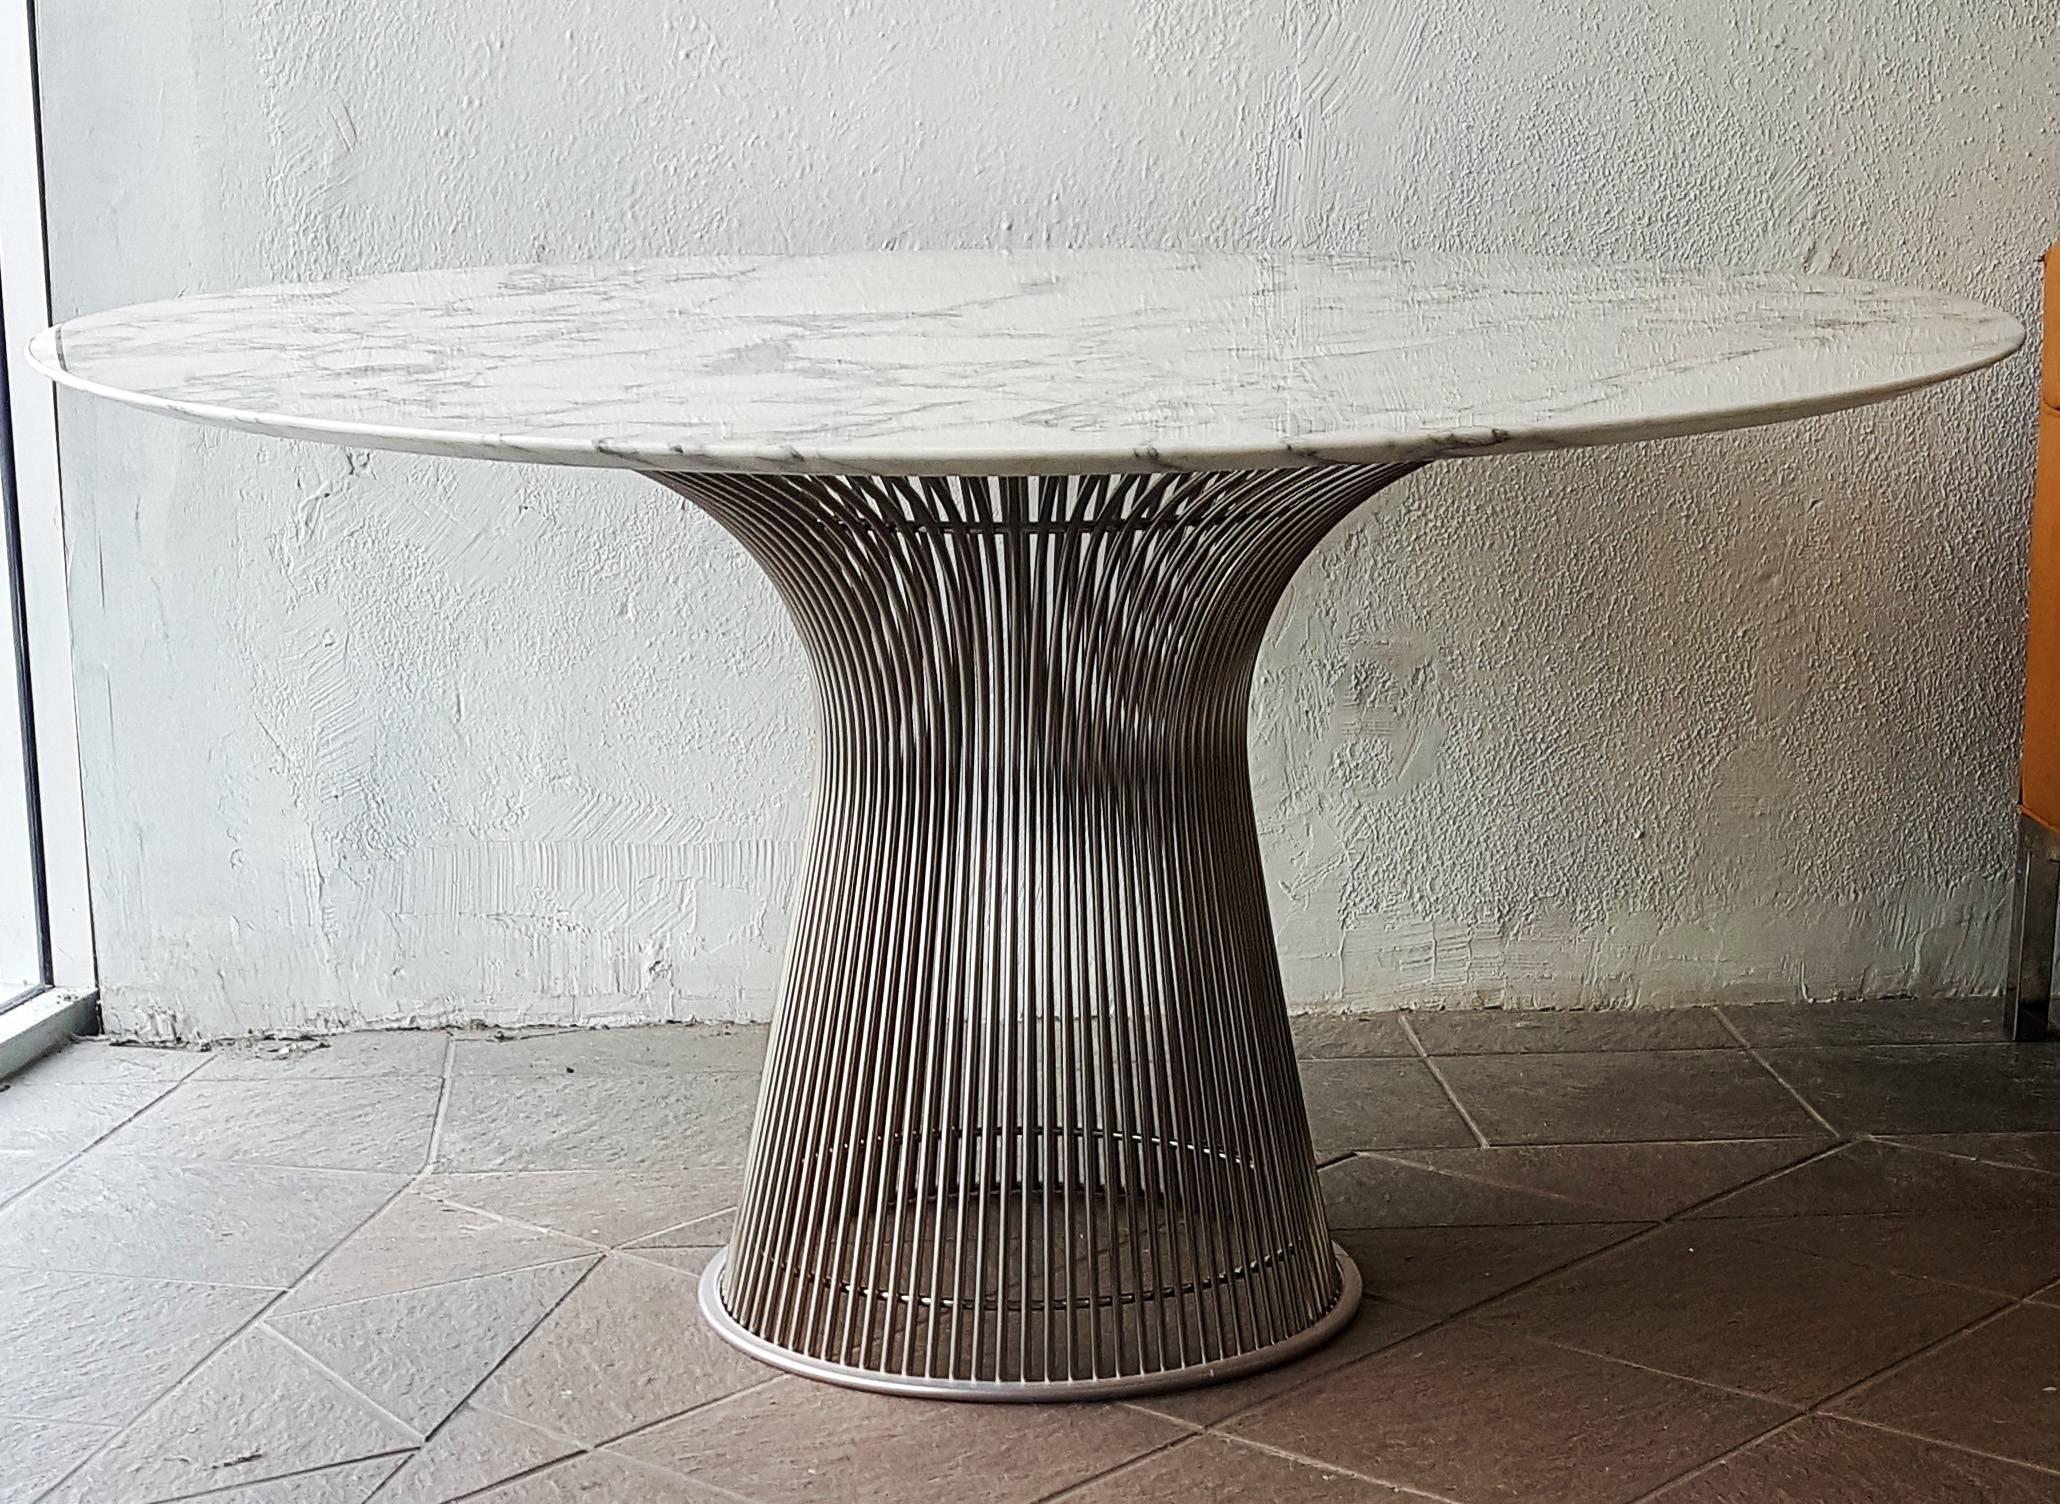 A truly stunning dining table, Warren Platner for Knoll polished nickel and steel base dining table with a stunning veined Italian Arabescato marble top.